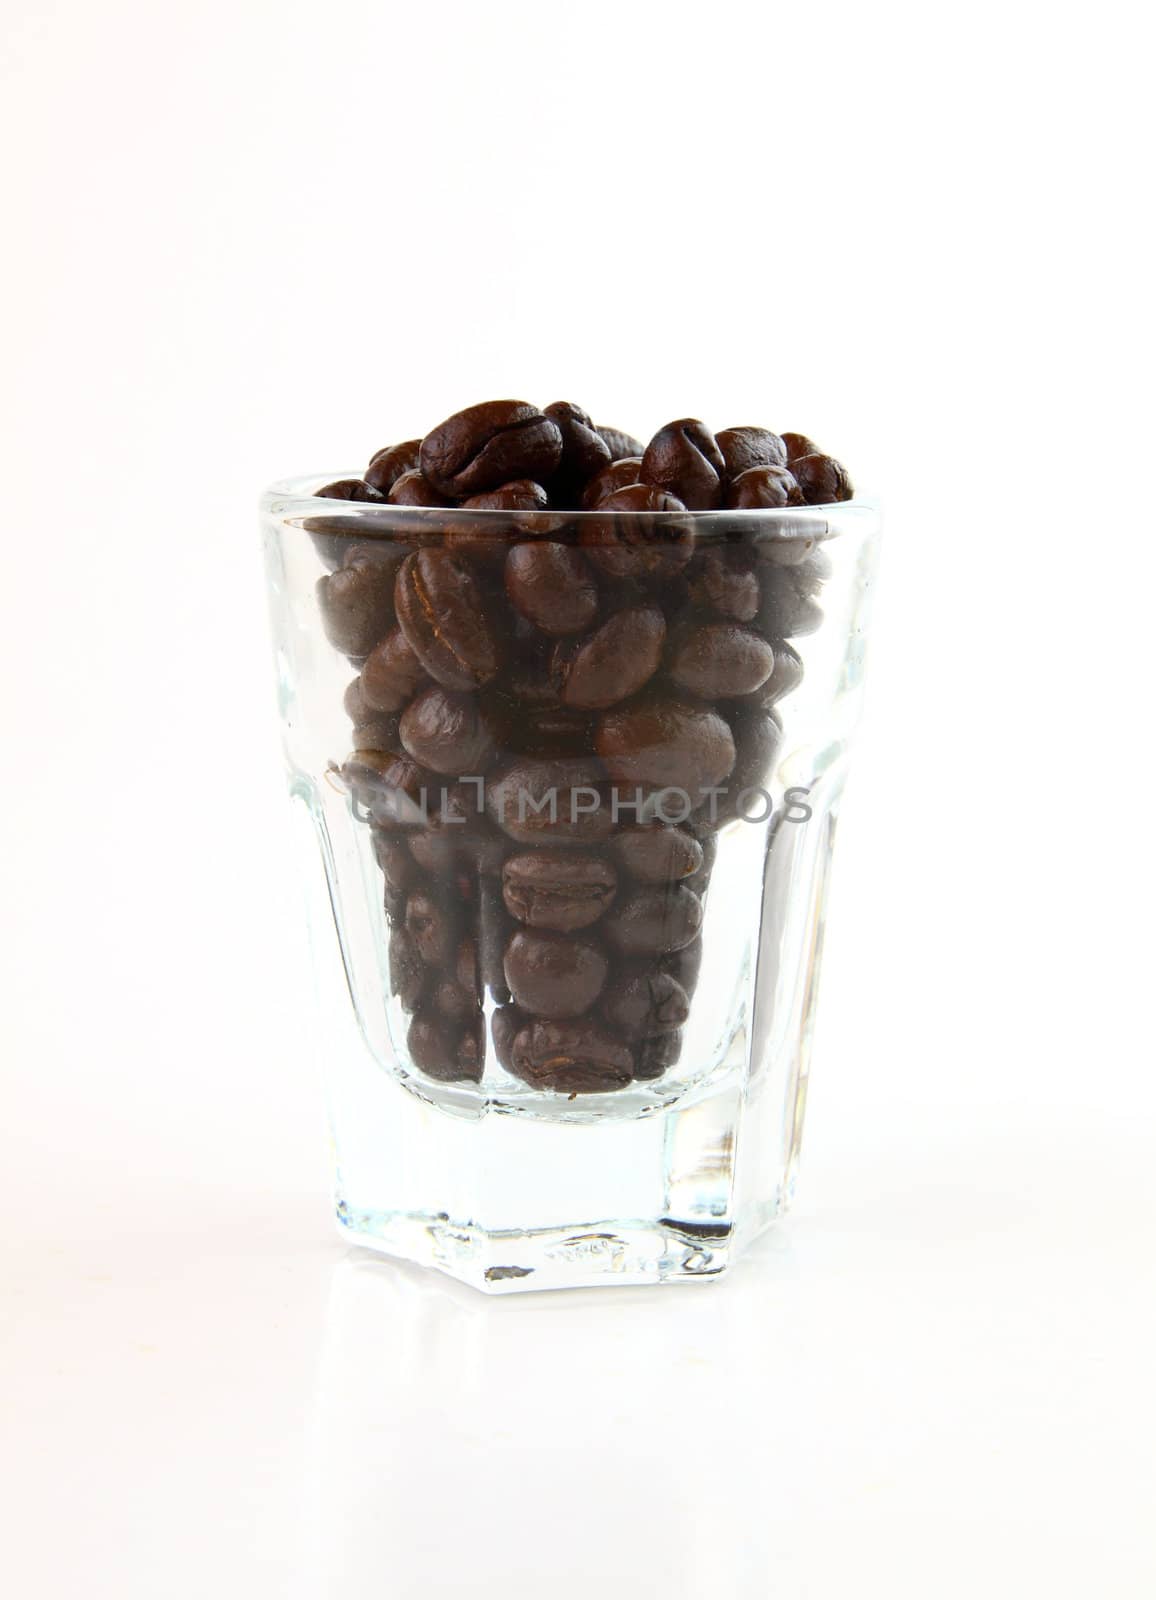 Coffee beans in a small glass on white background